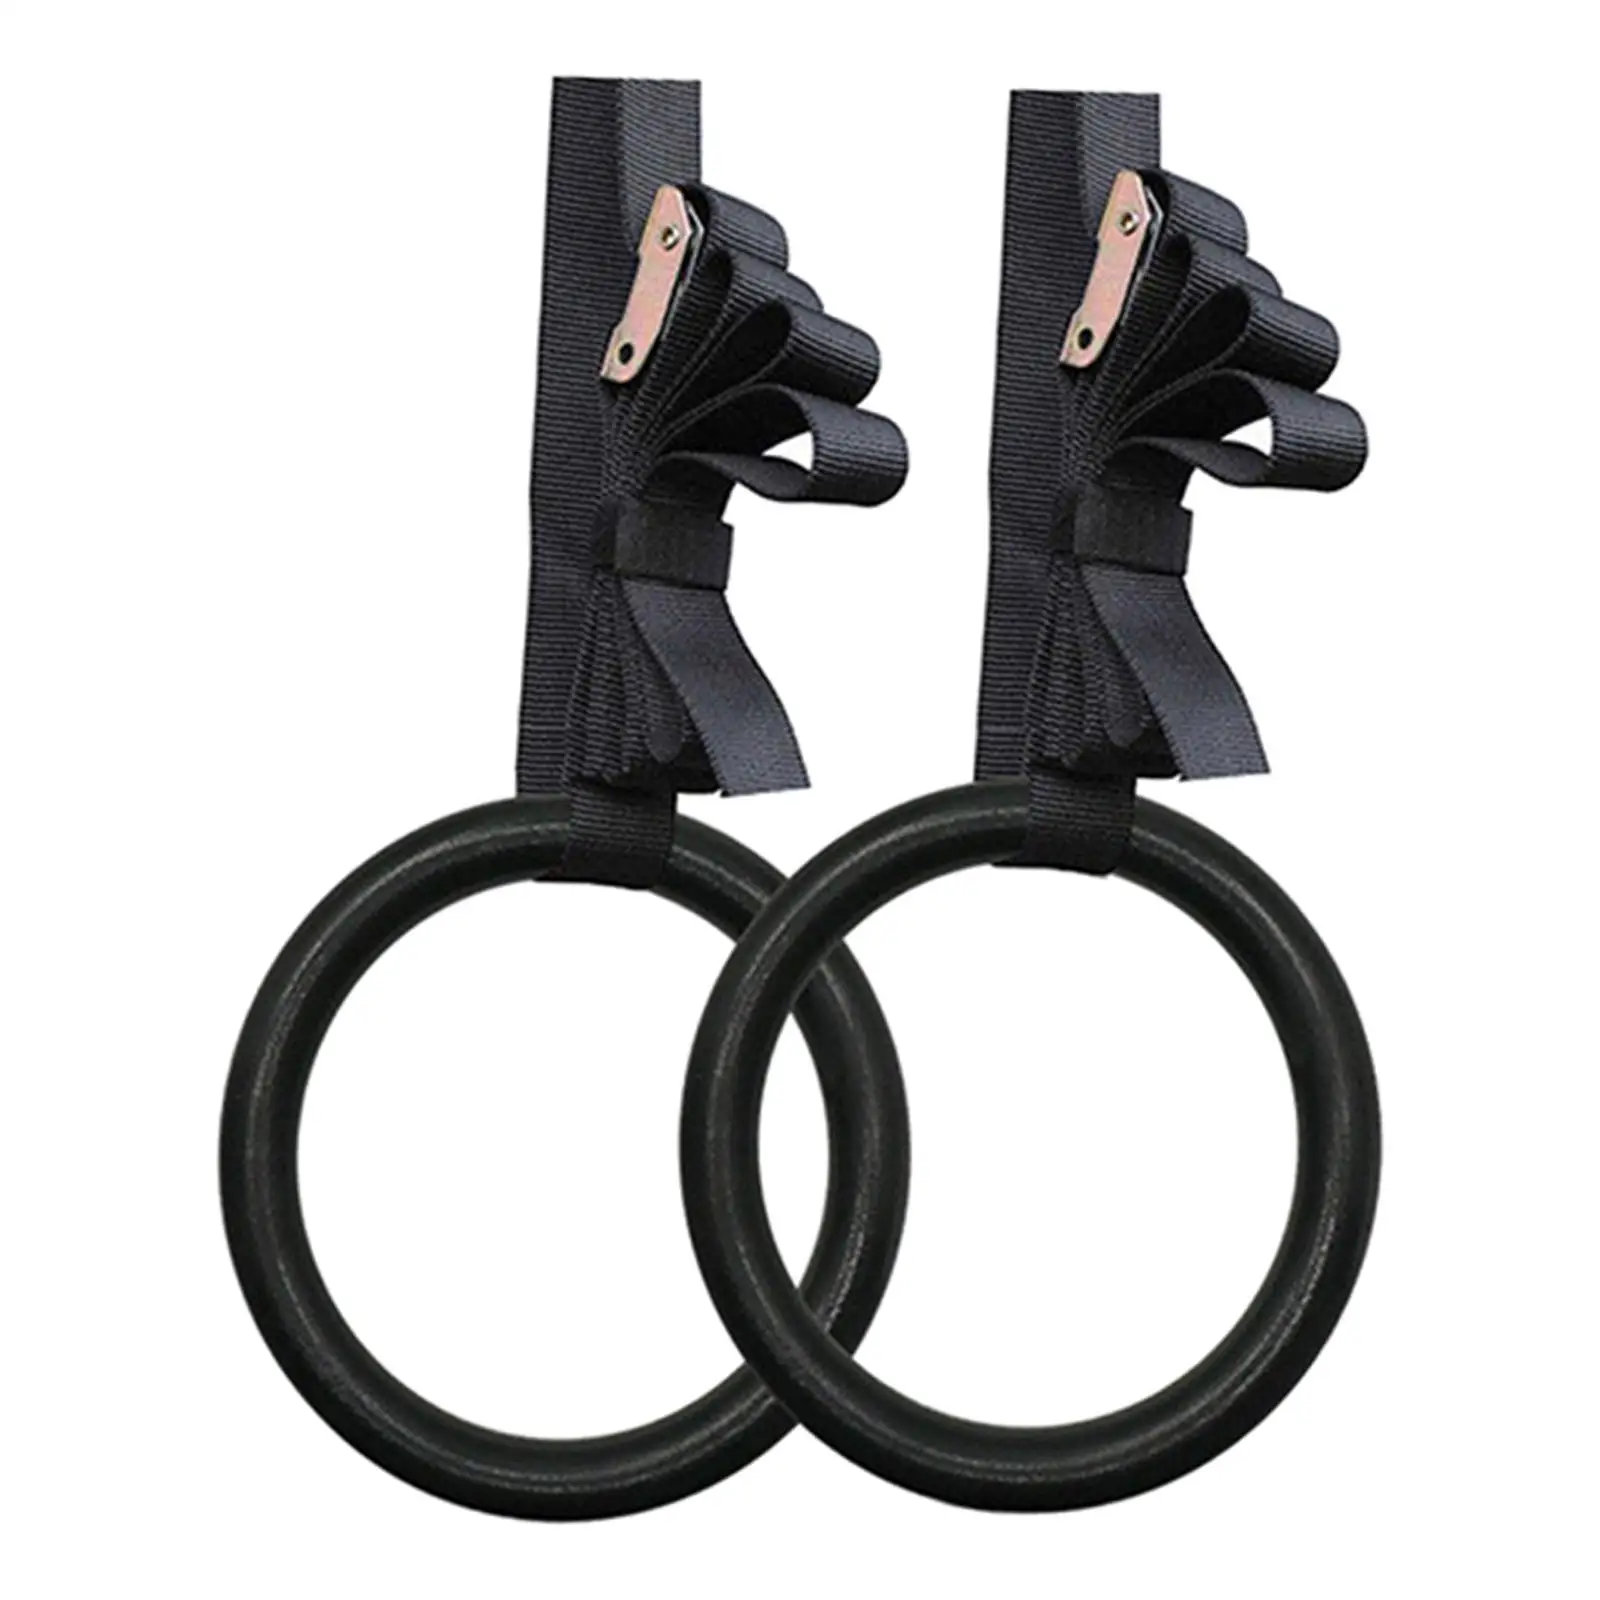 2Pcs Gymnastic Ring with Buckle Straps, Trainer Anti Slip Portable Unisex Gym